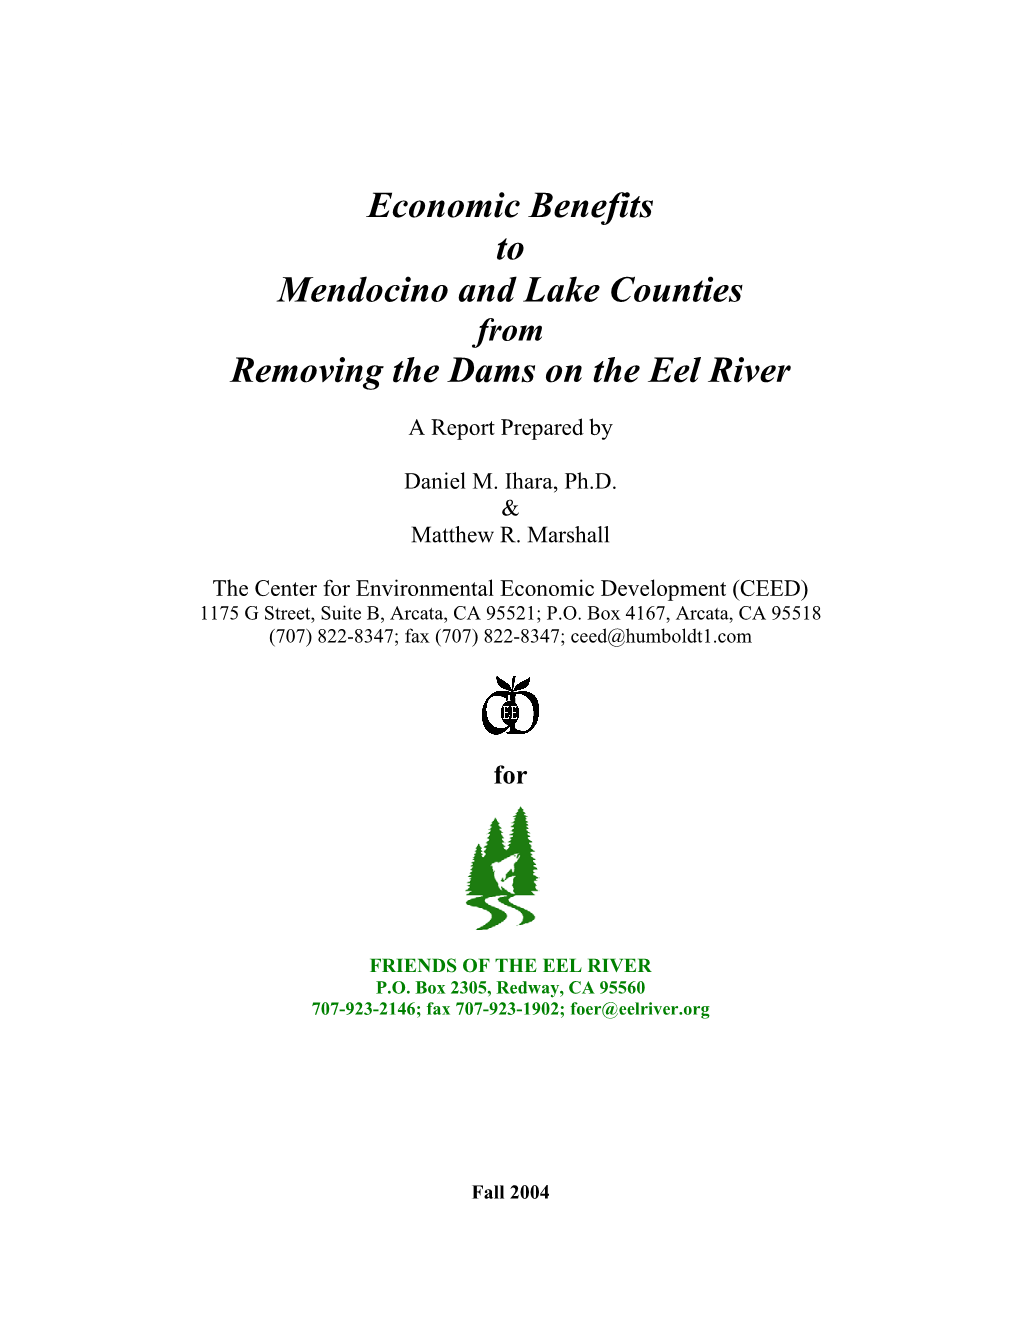 Economic Benefits to Mendocino and Lake Counties from Removing the Dams on the Eel River